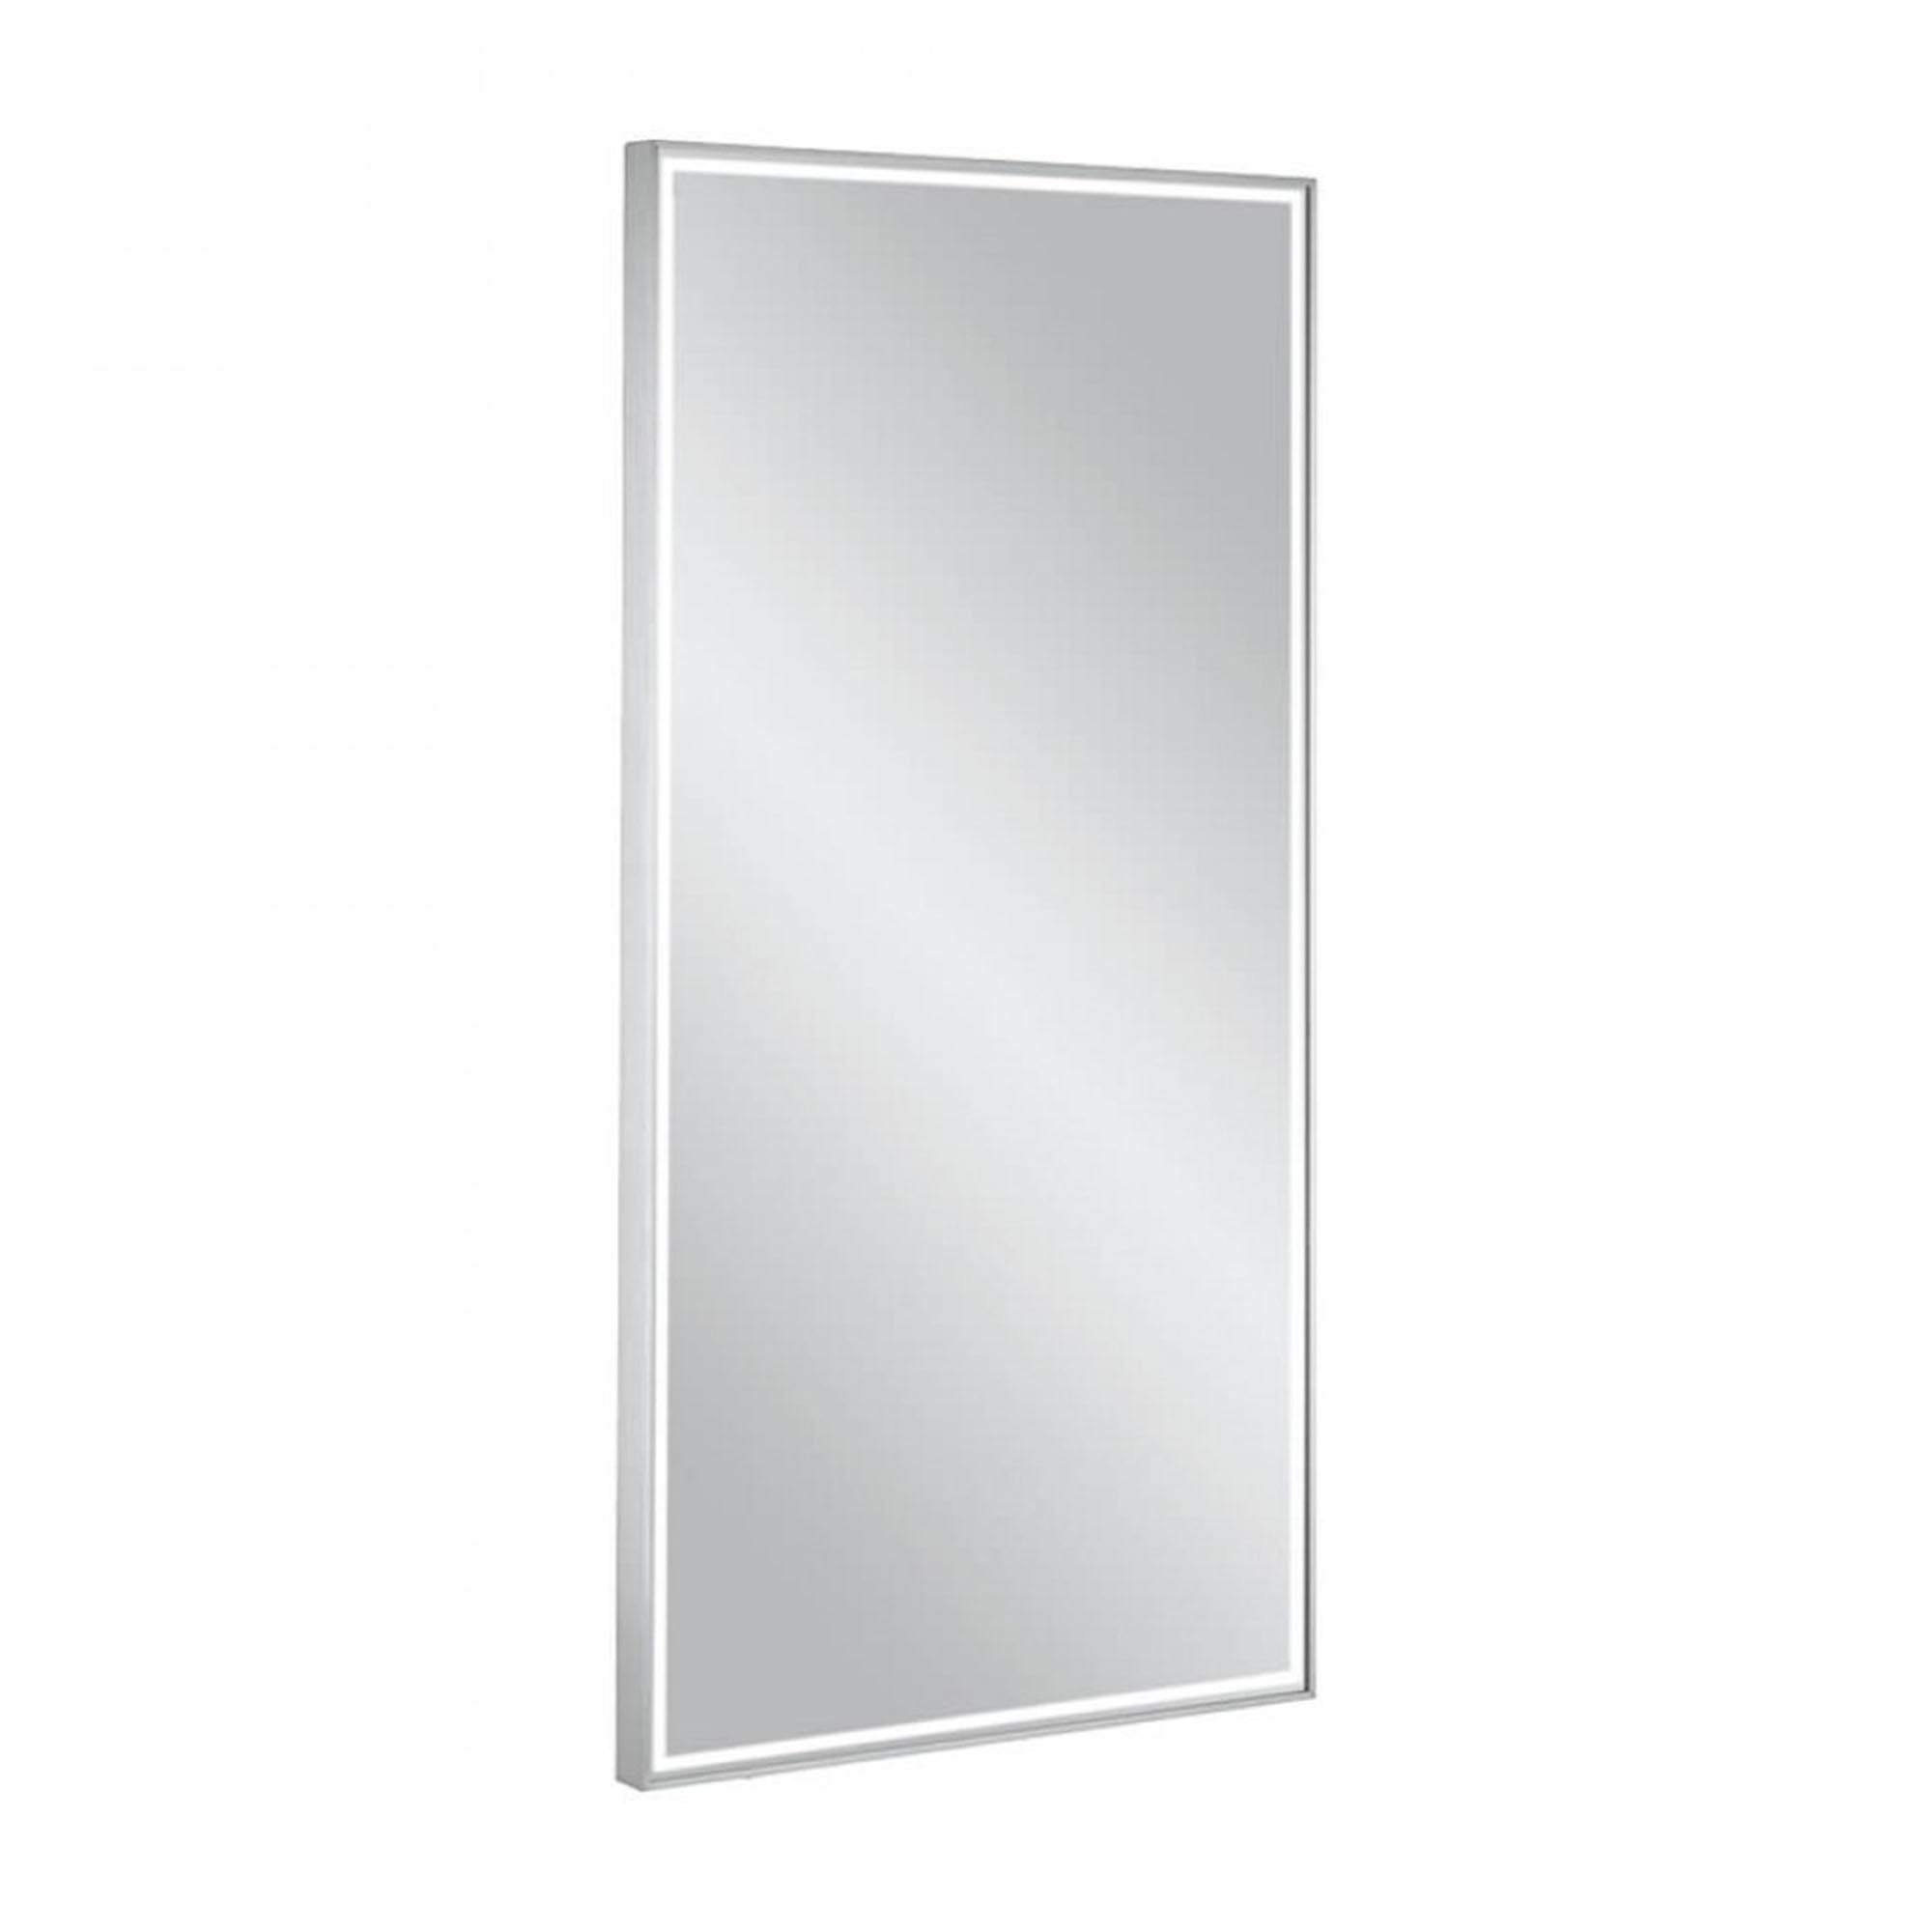 crosswater mpro led mirror 600x800mm brushed stainless steel